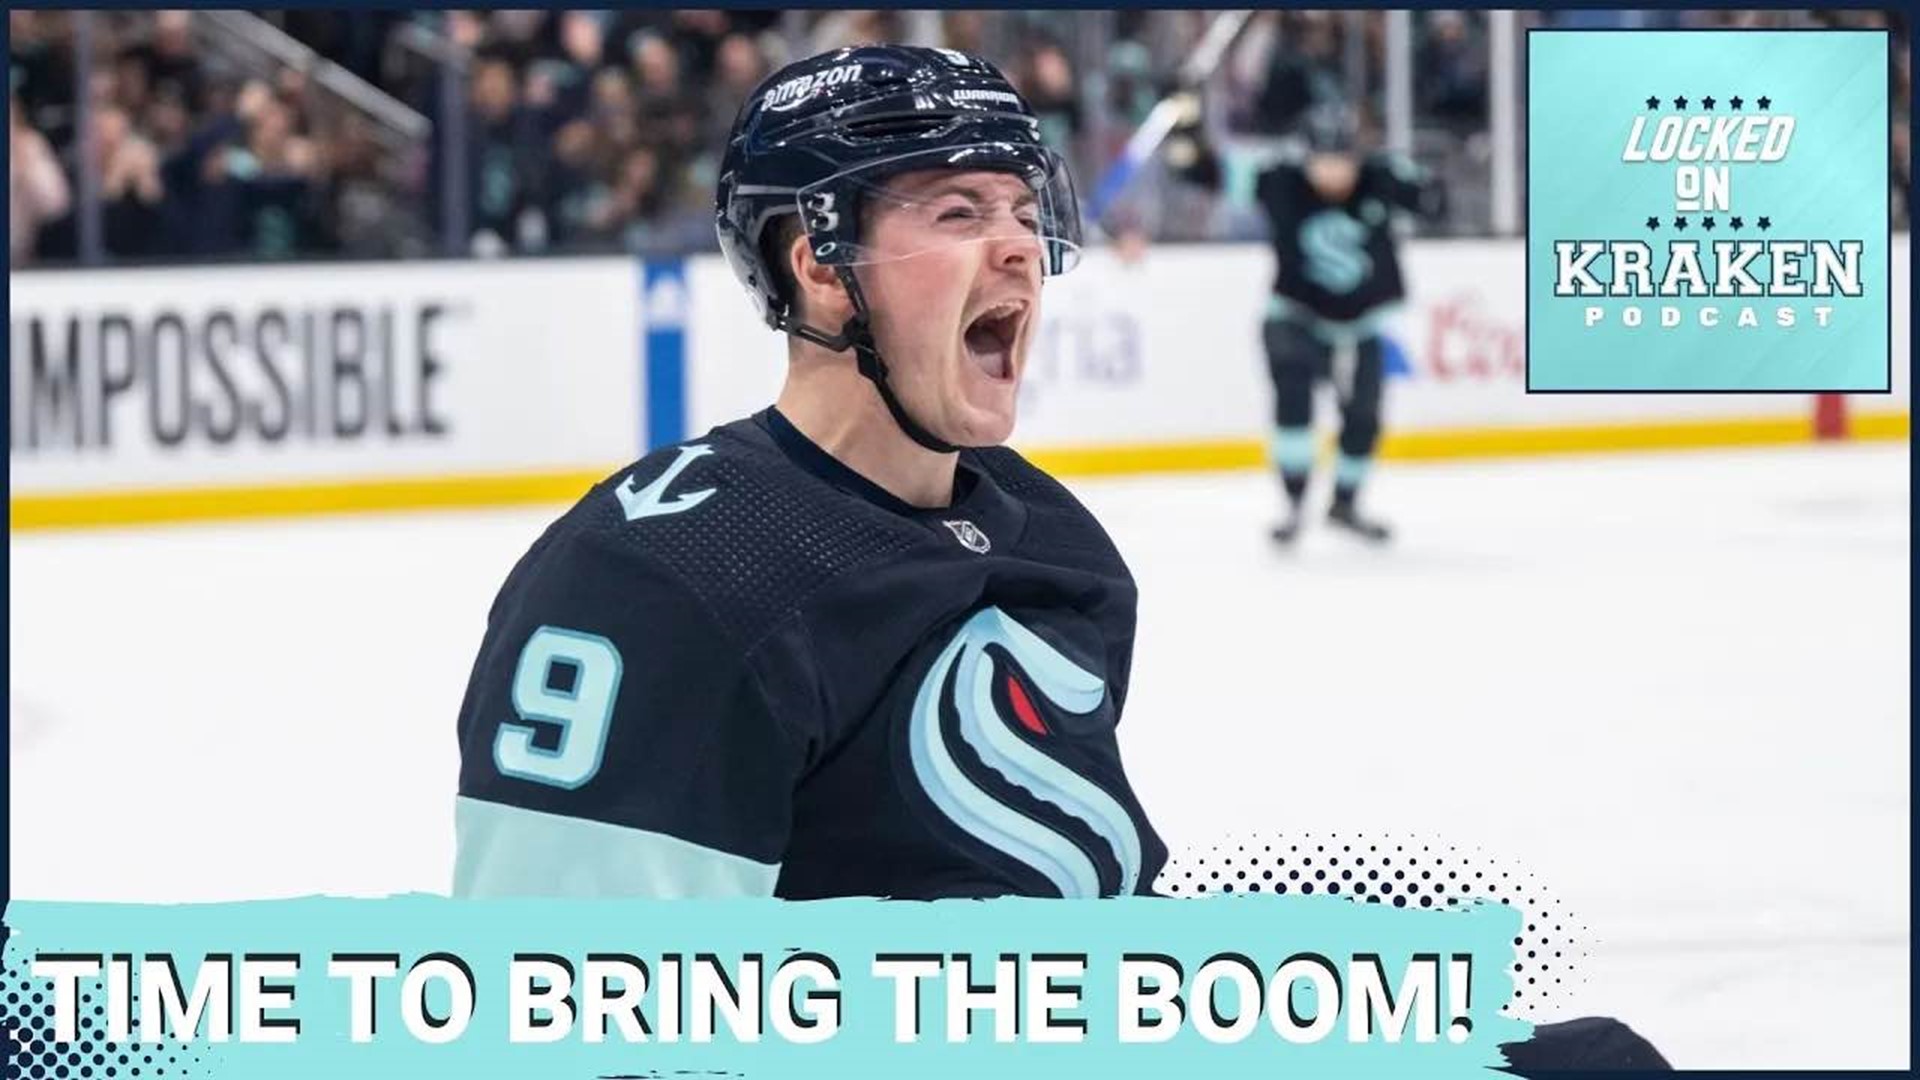 Locked On Kraken is a daily podcast covering the 32nd NHL team.